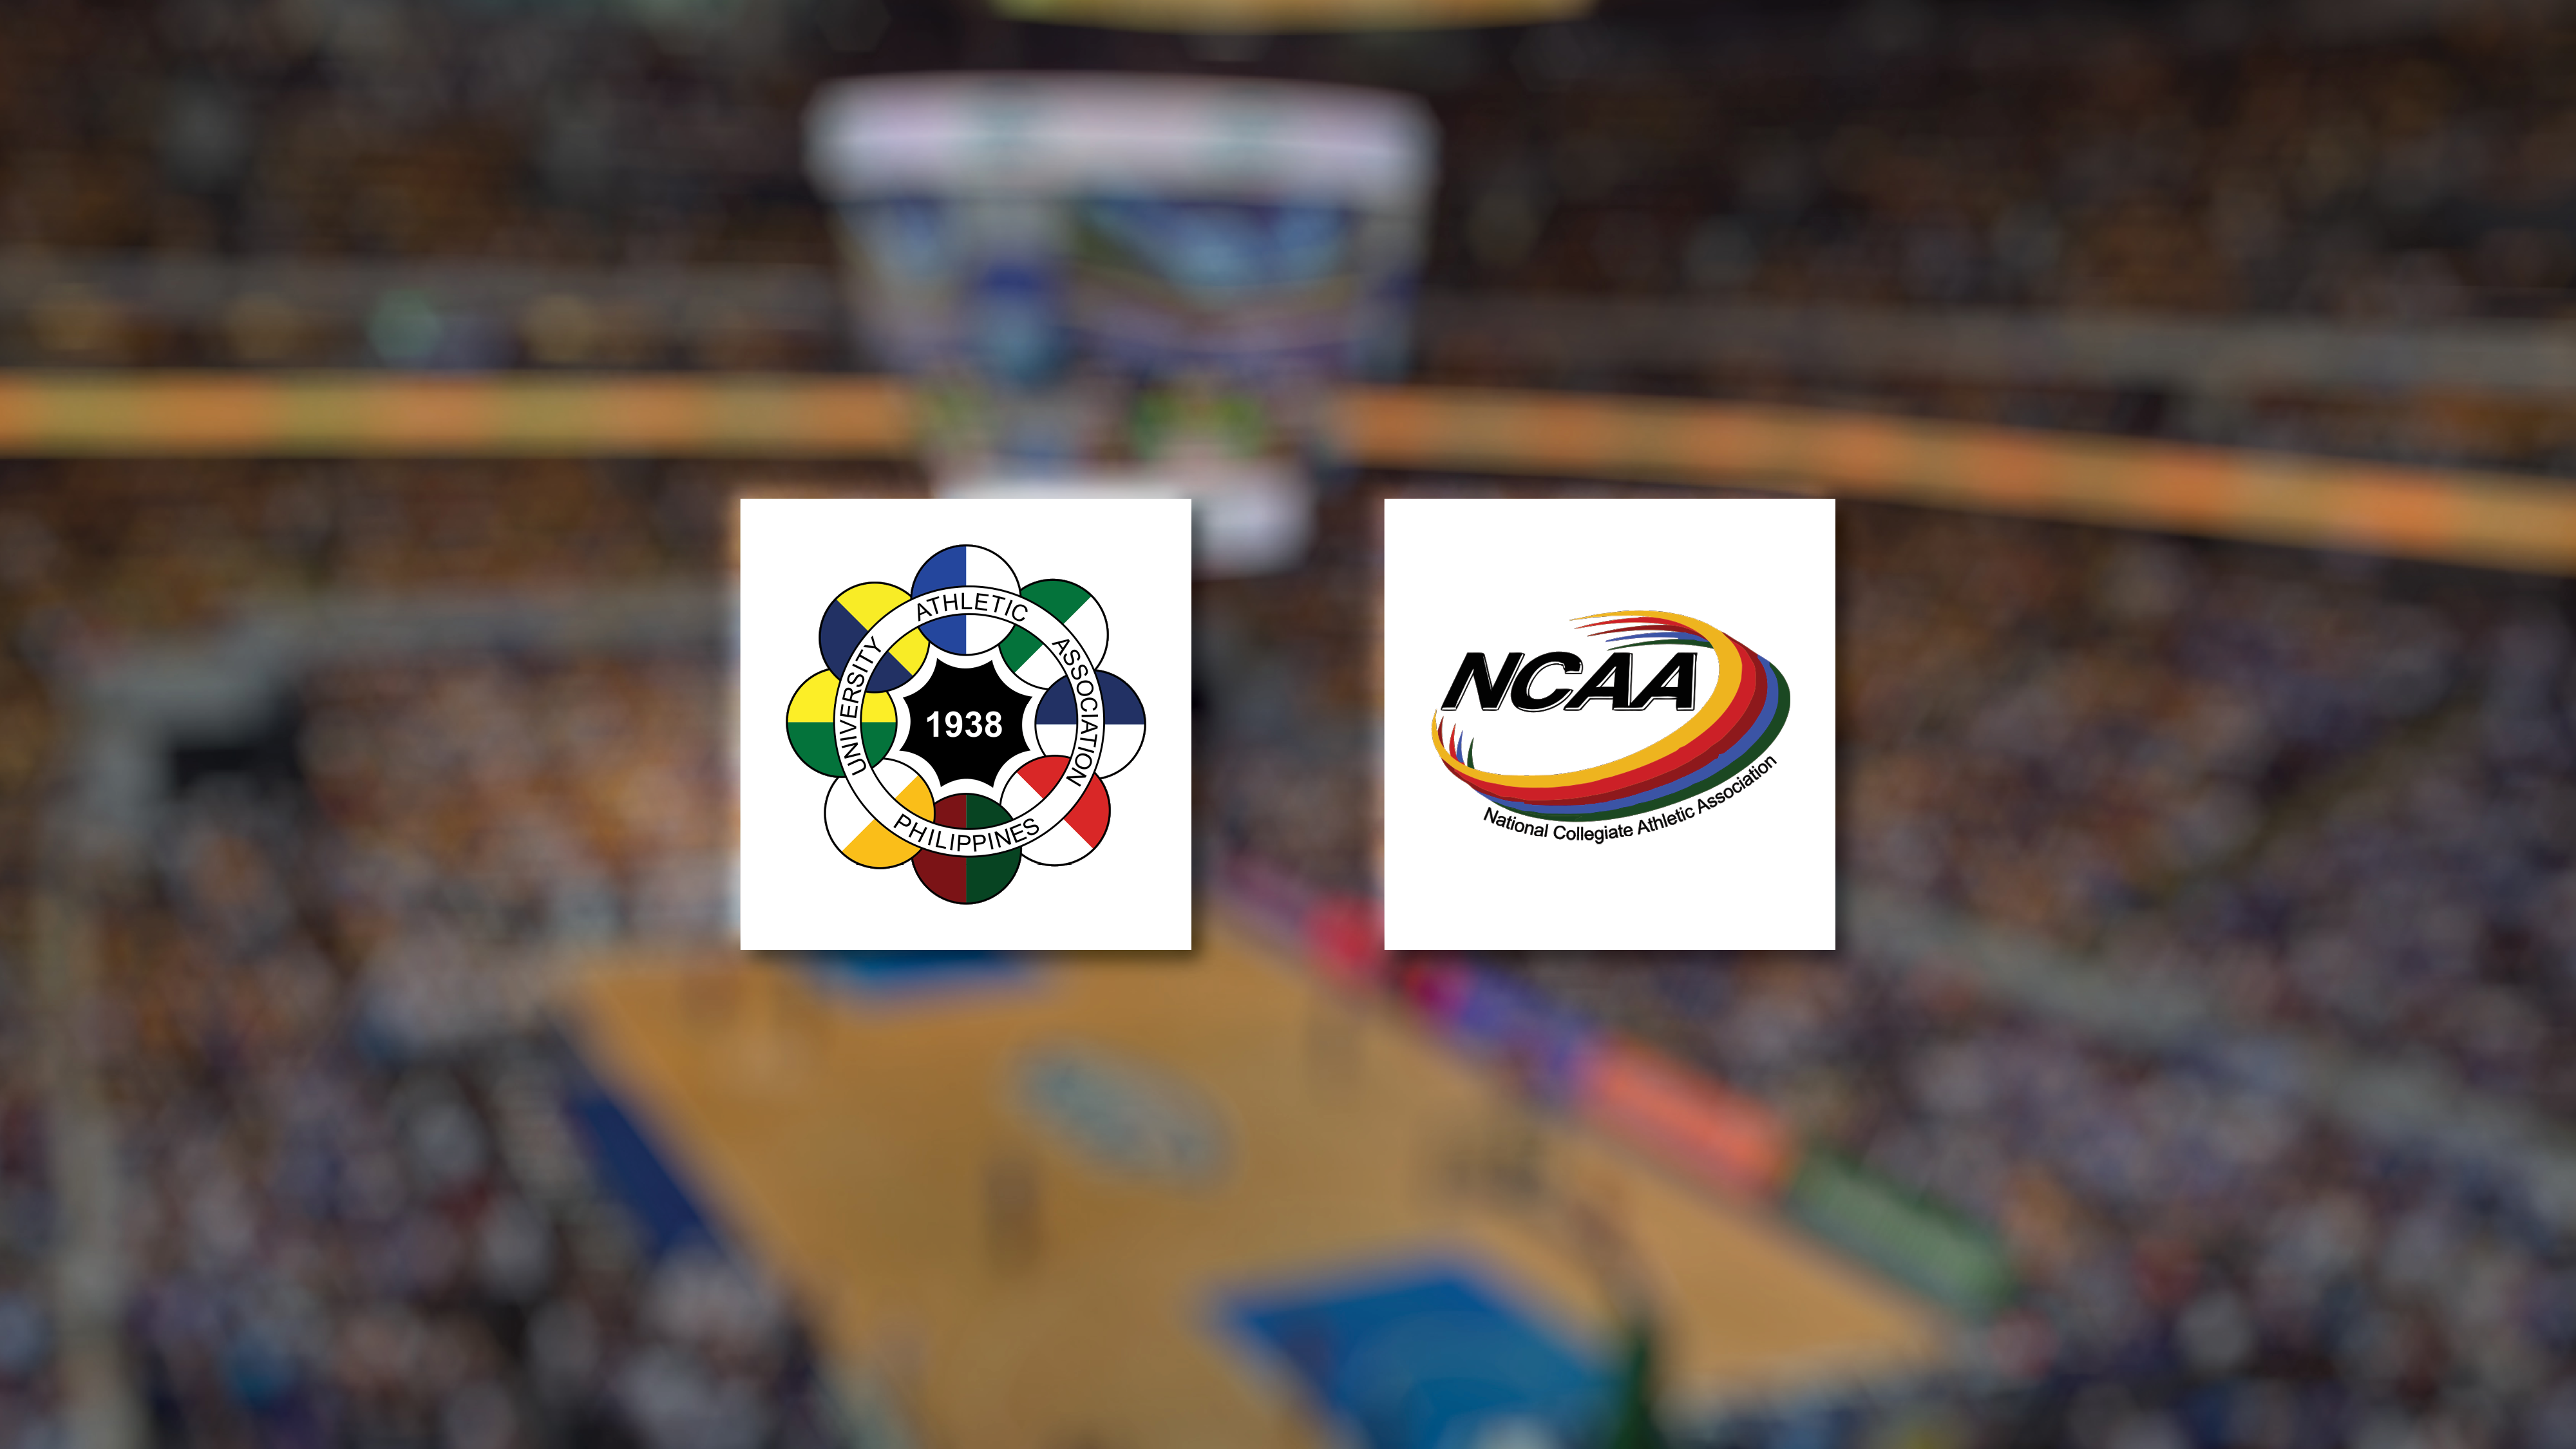 CHED approves face-to-face training for UAAP, NCAA athletes